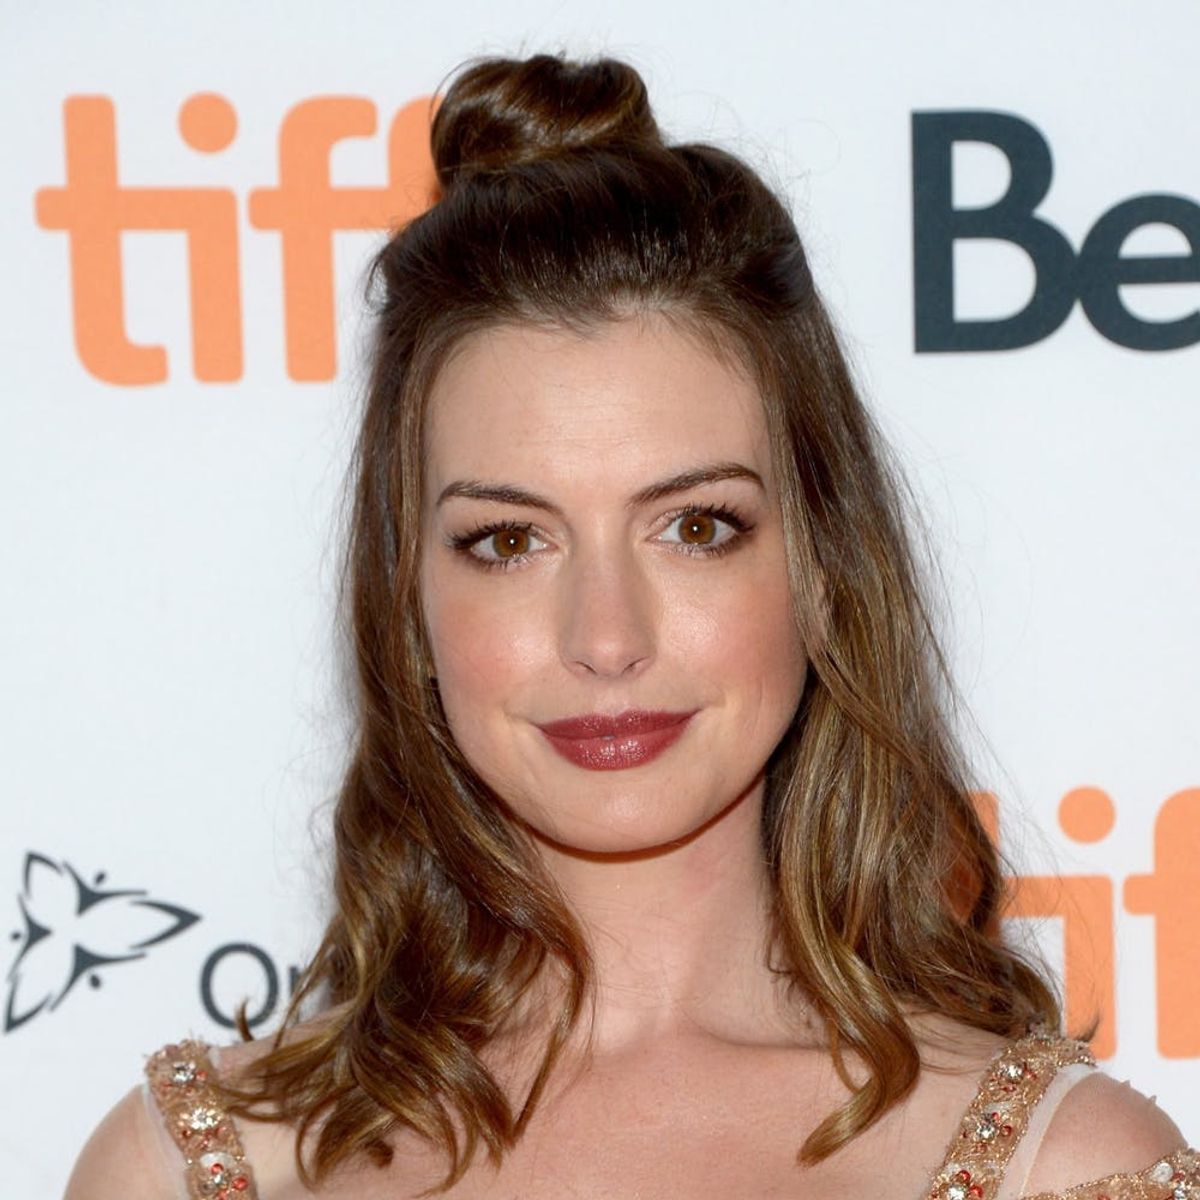 Anne Hathaway Shared the First Snap of Her Son on Social Media for the Best Reason